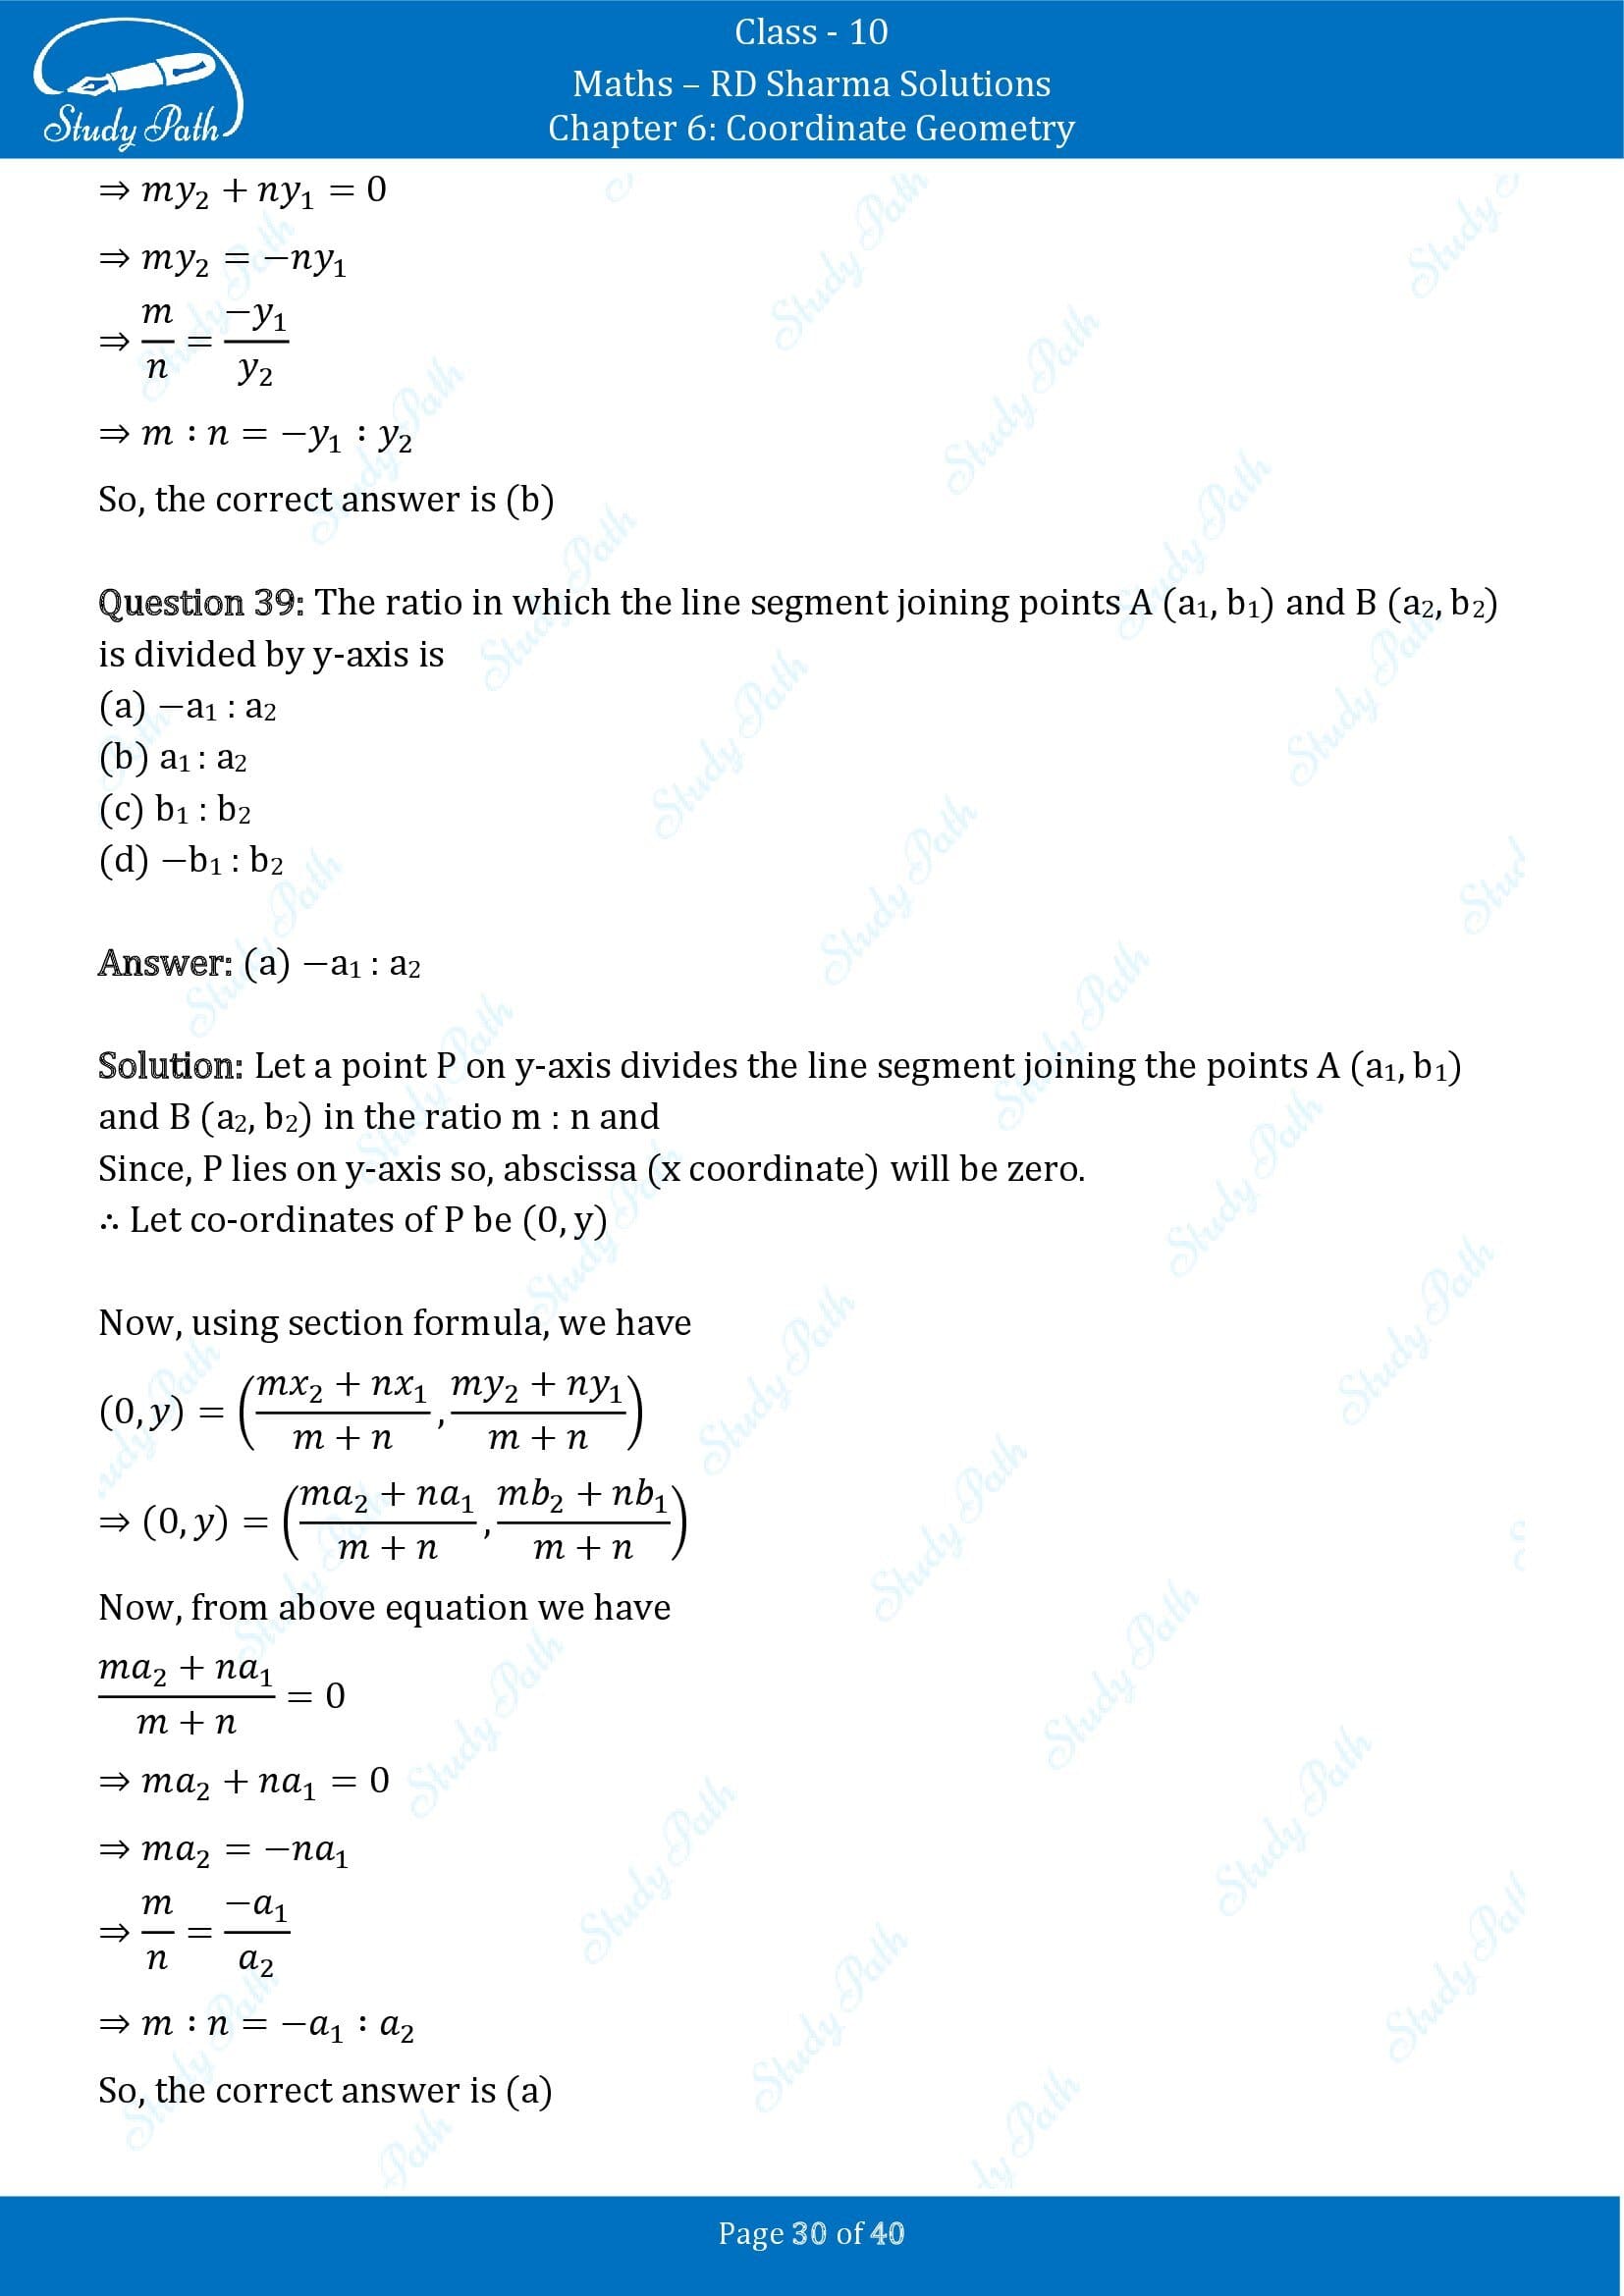 RD Sharma Solutions Class 10 Chapter 6 Coordinate Geometry Multiple Choice Question MCQs 00030